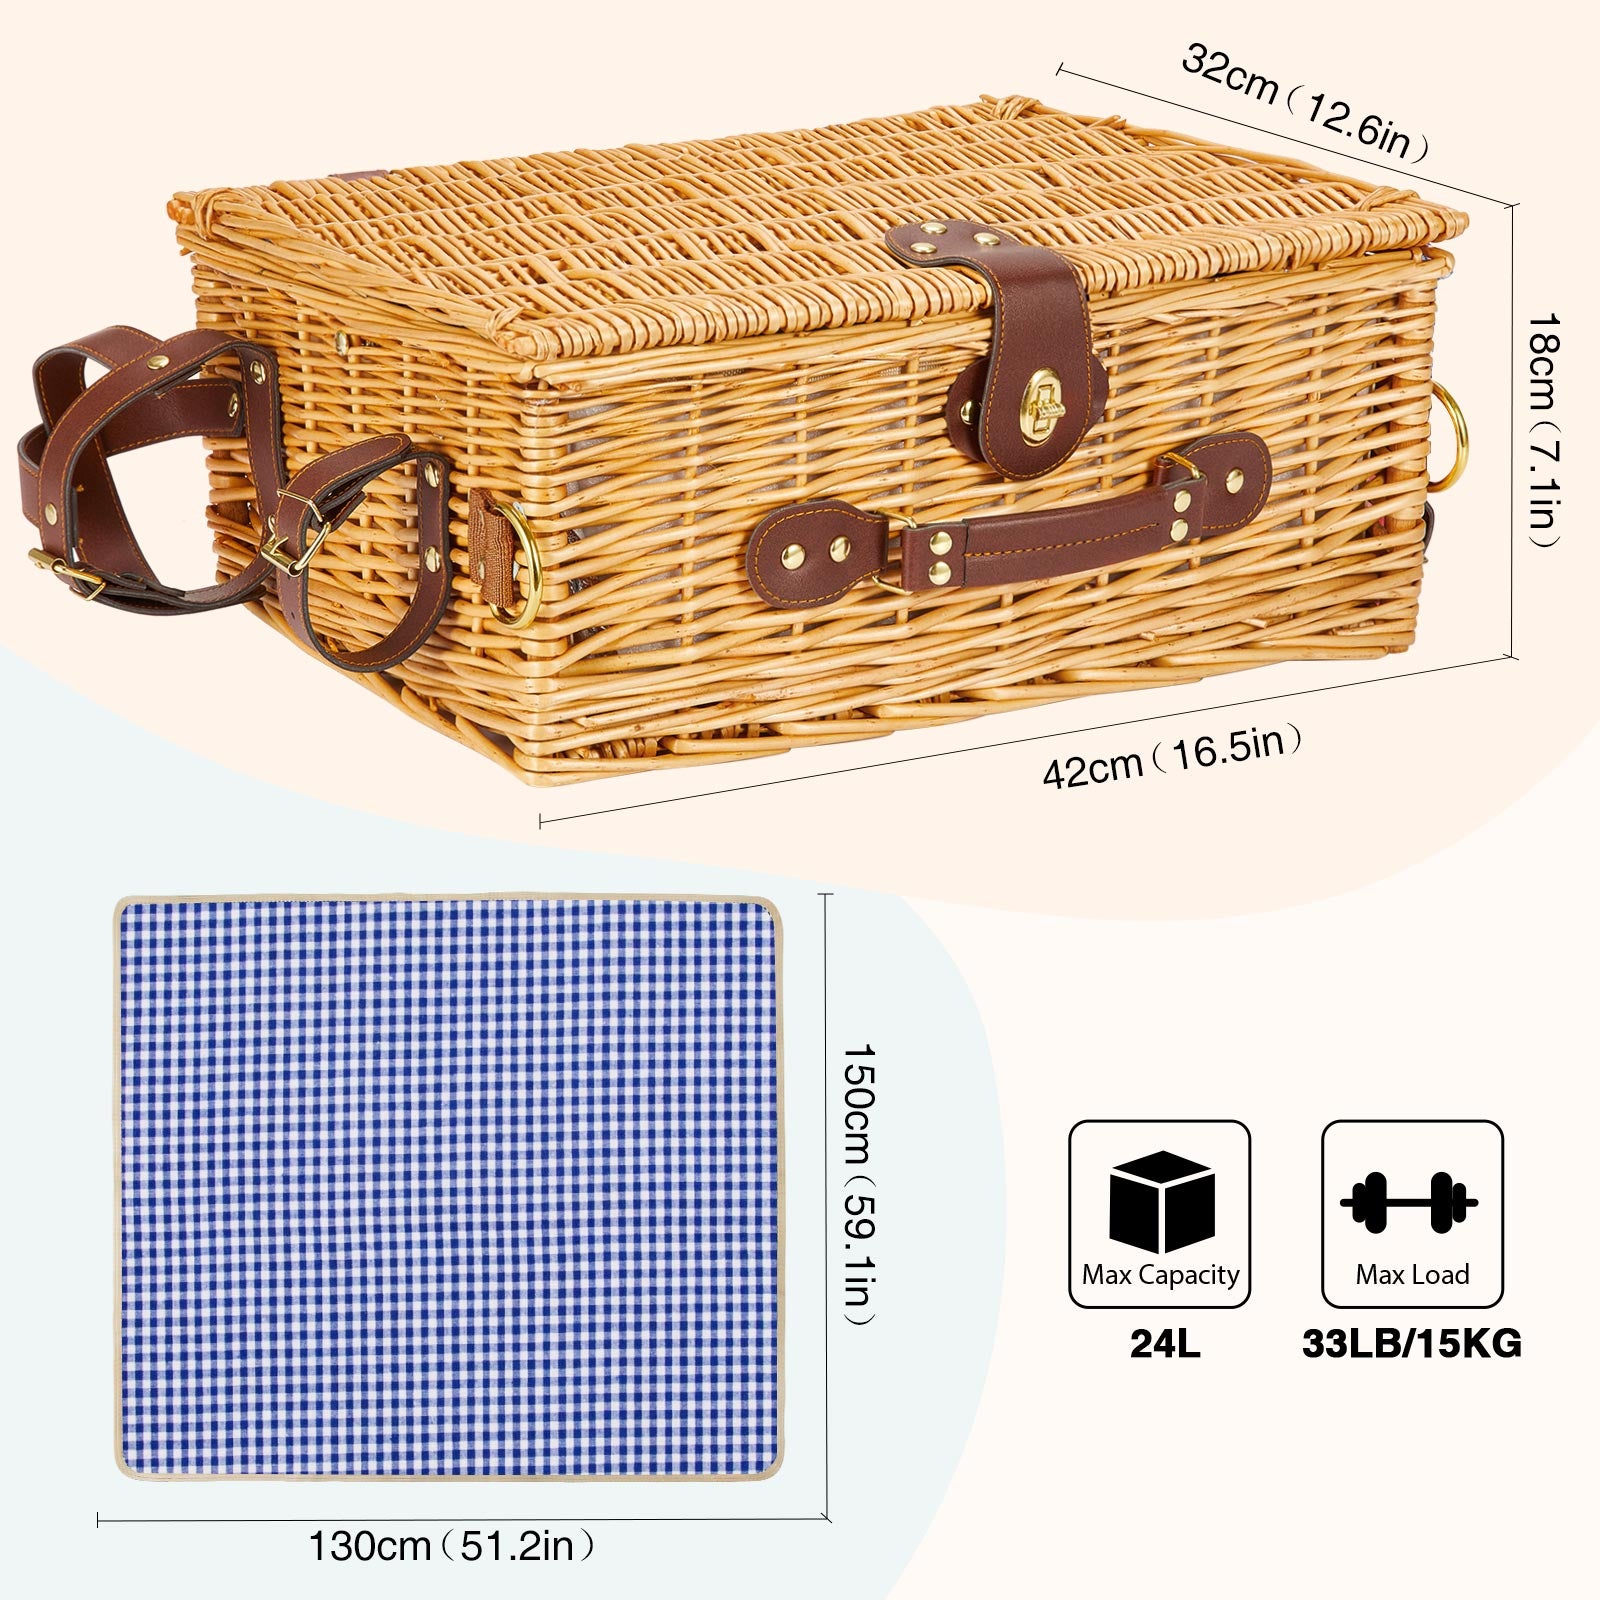 Greenstell Wicker Picnic Basket Sets with High Sealing Insulation Laye